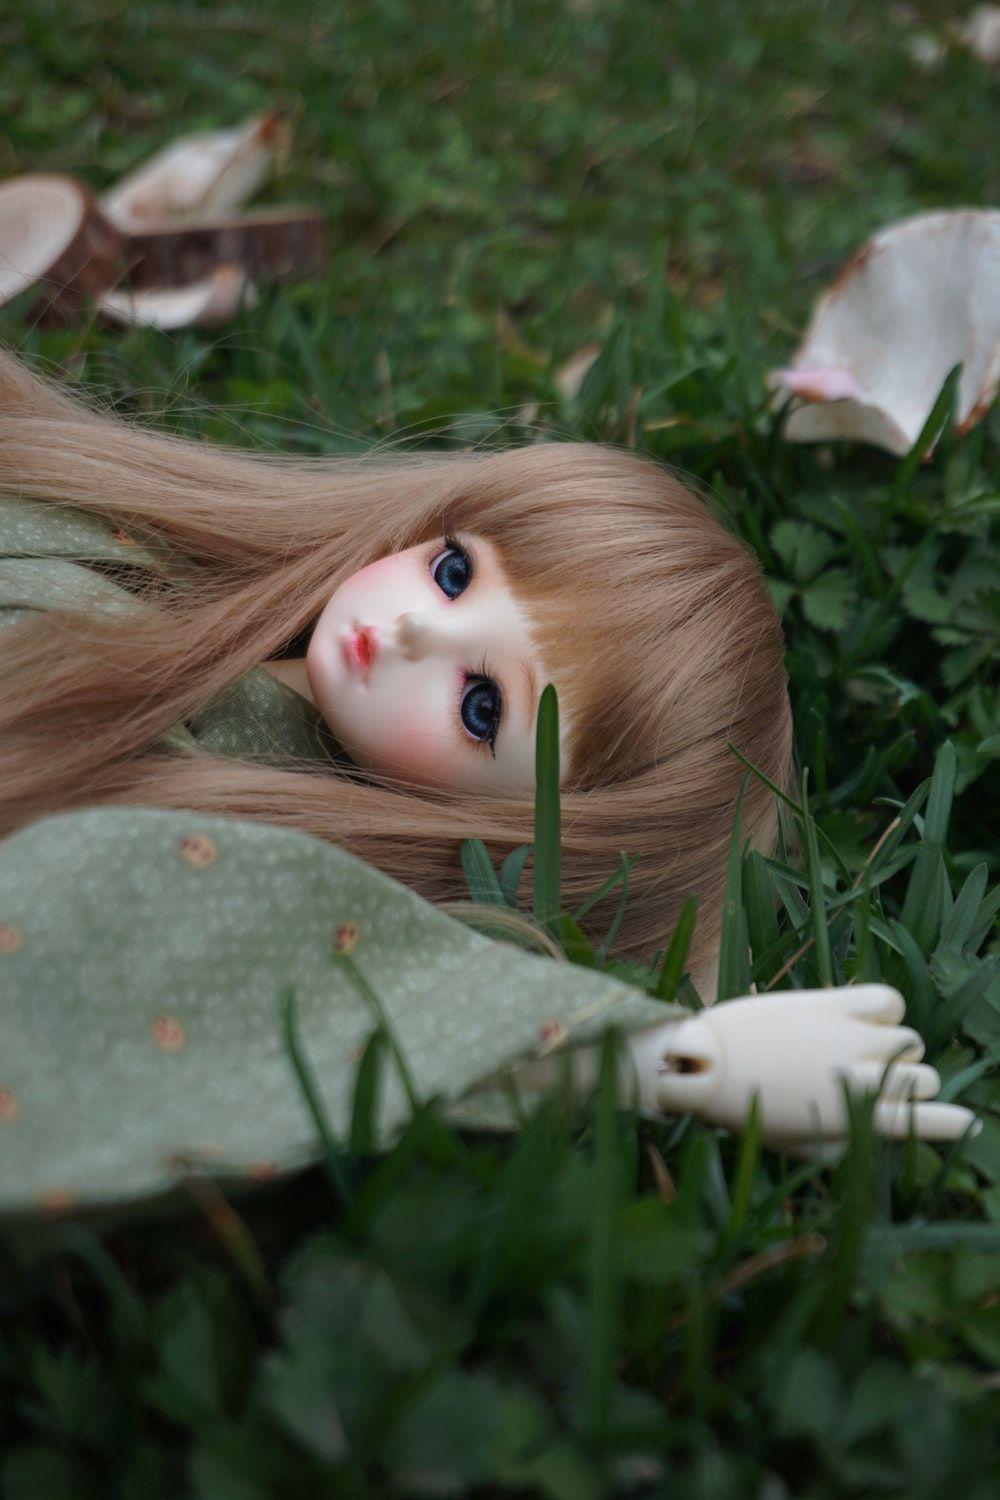 Doll Picture. Download Free Image